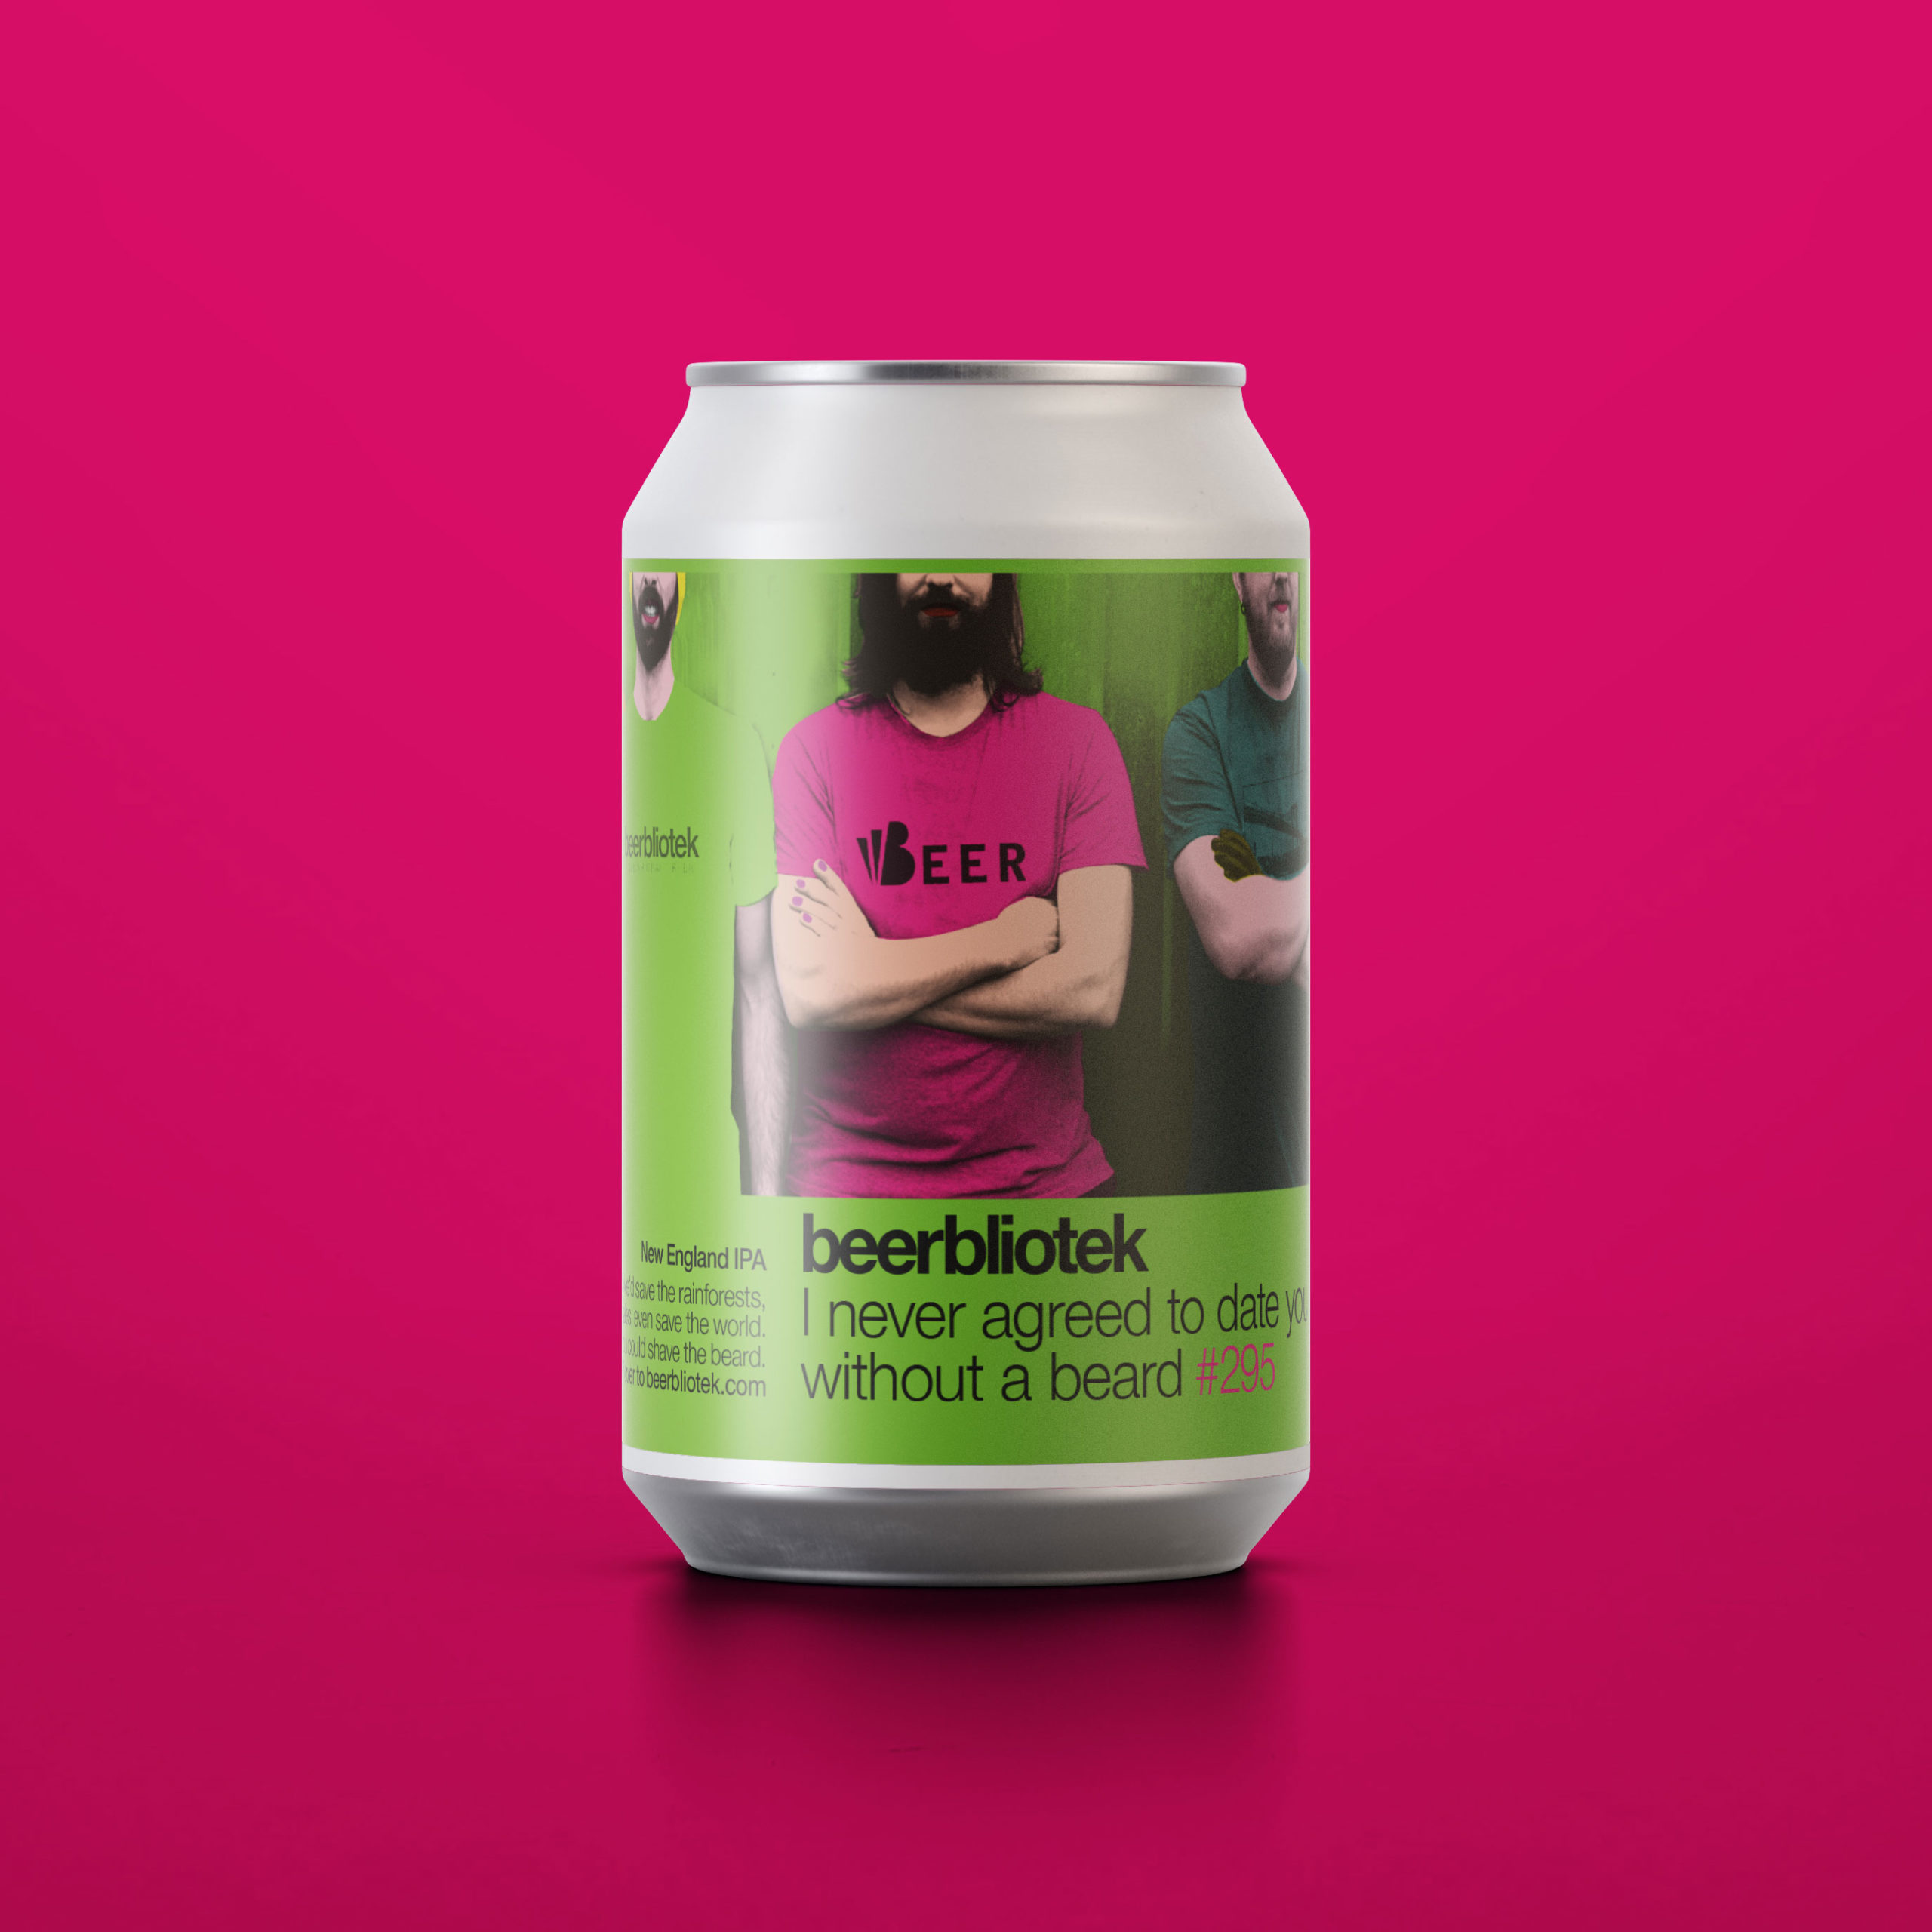 A can packshot of I never agreed to date you without a beard, a New England IPA brewed in Gothenburg, by Swedish Craft Brewery Beerbliotek.